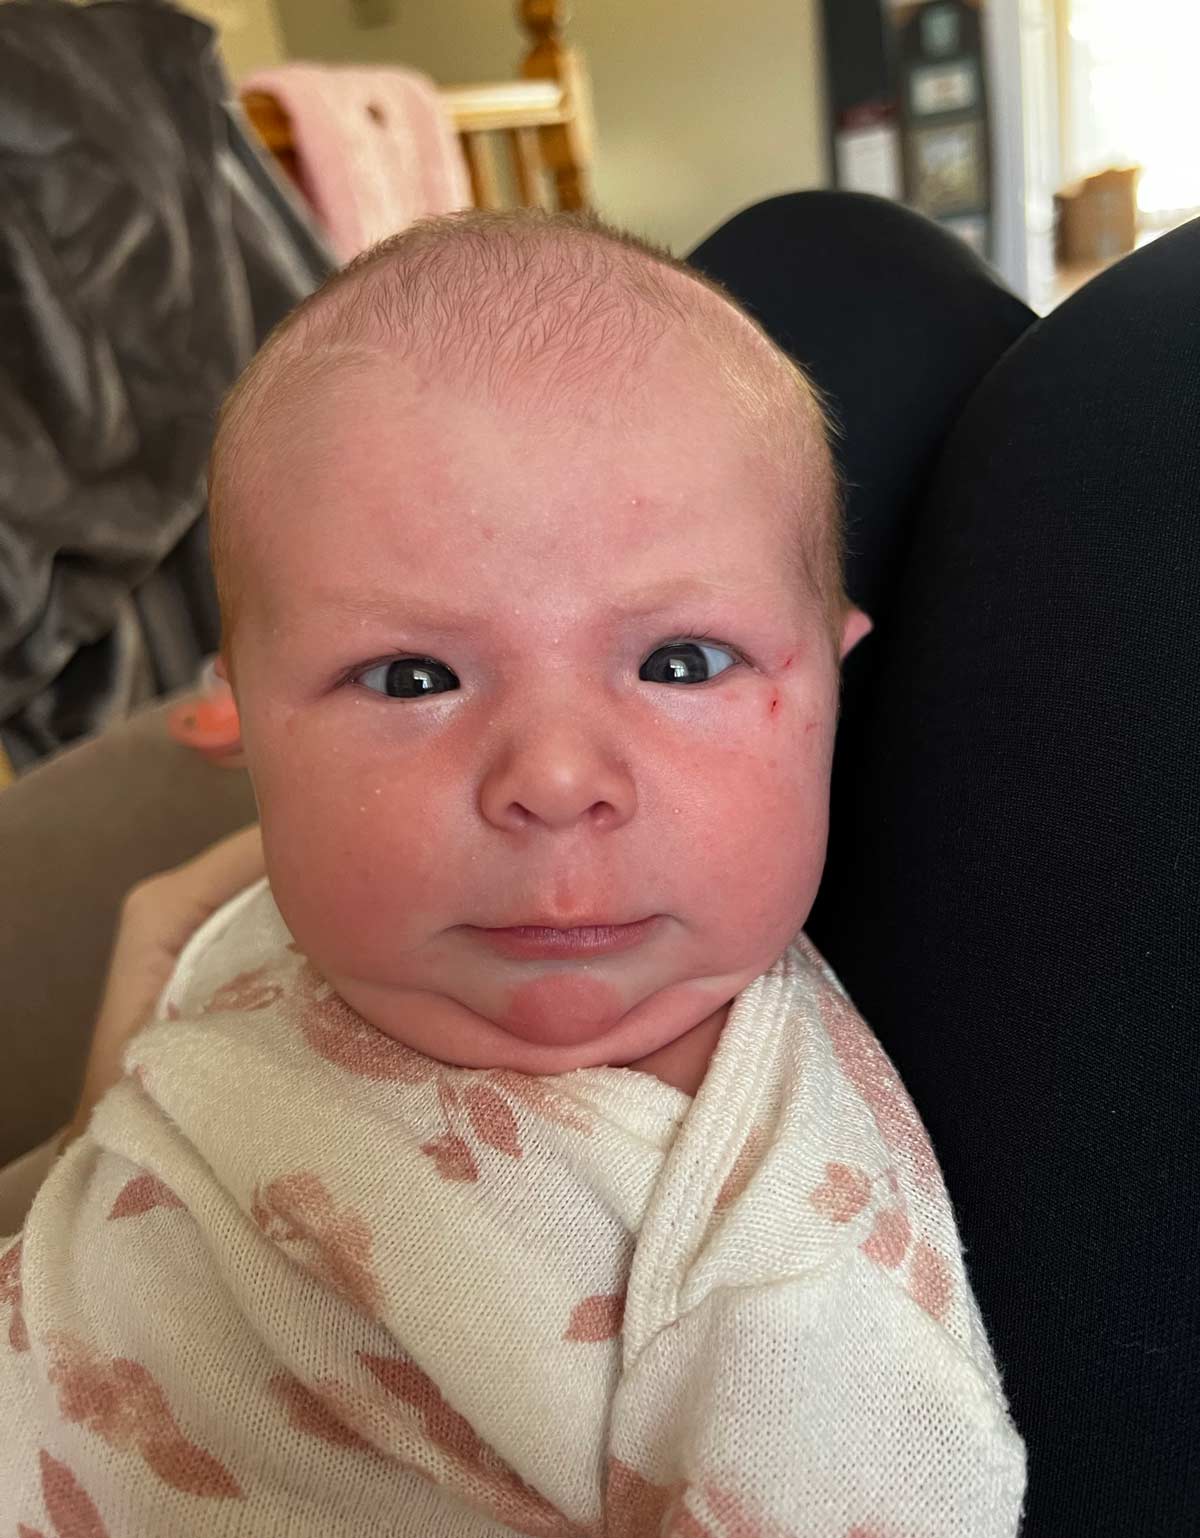 2 weeks old and my granddaughter is already judging me